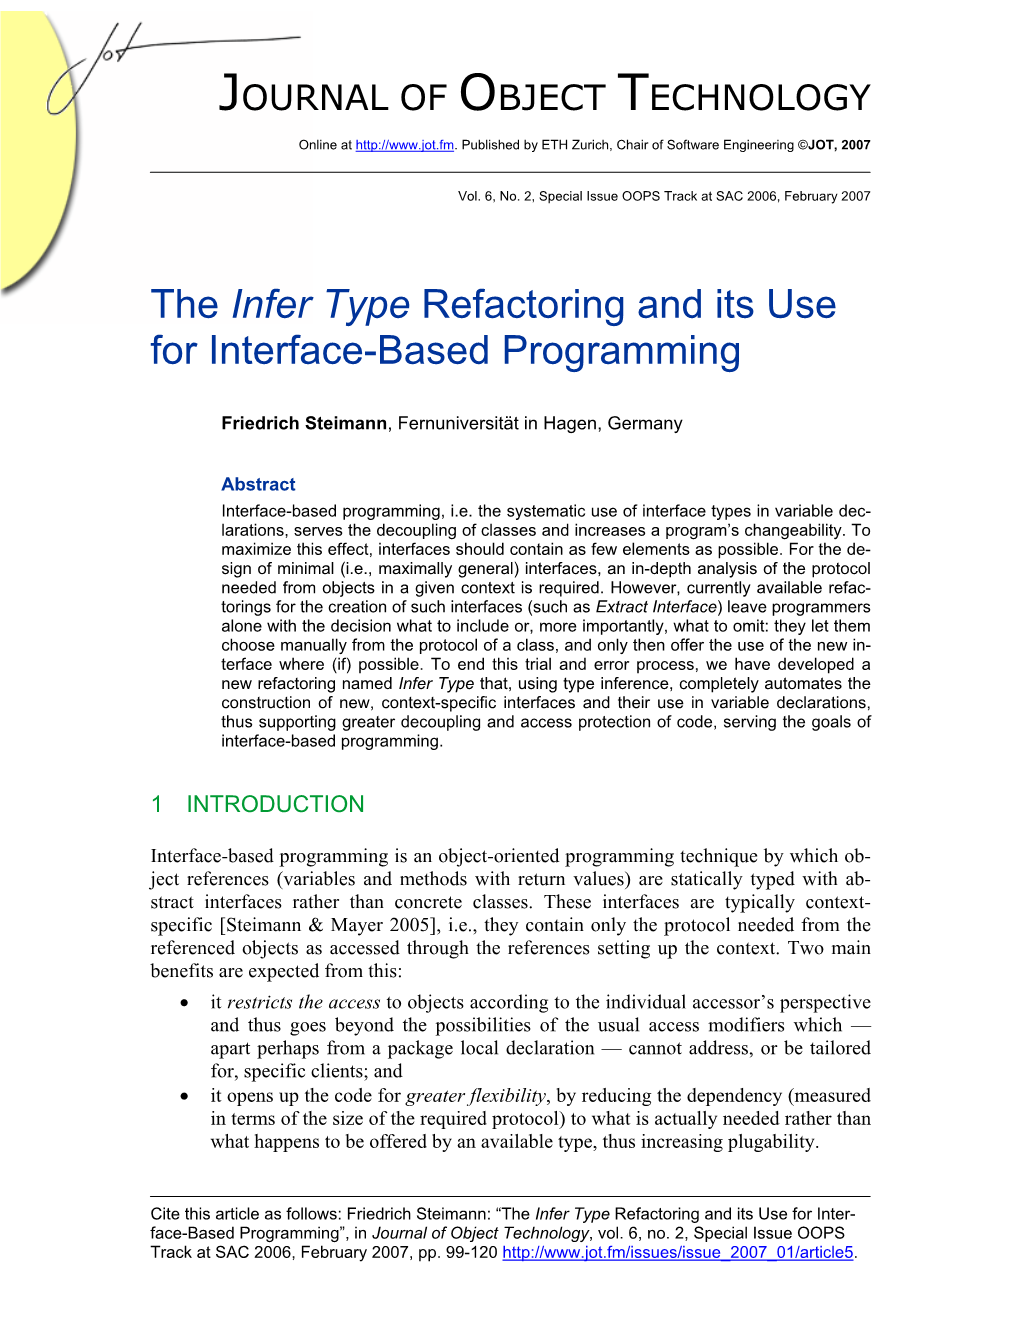 The Infer Type Refactoring and Its Use for Interface-Based Programming